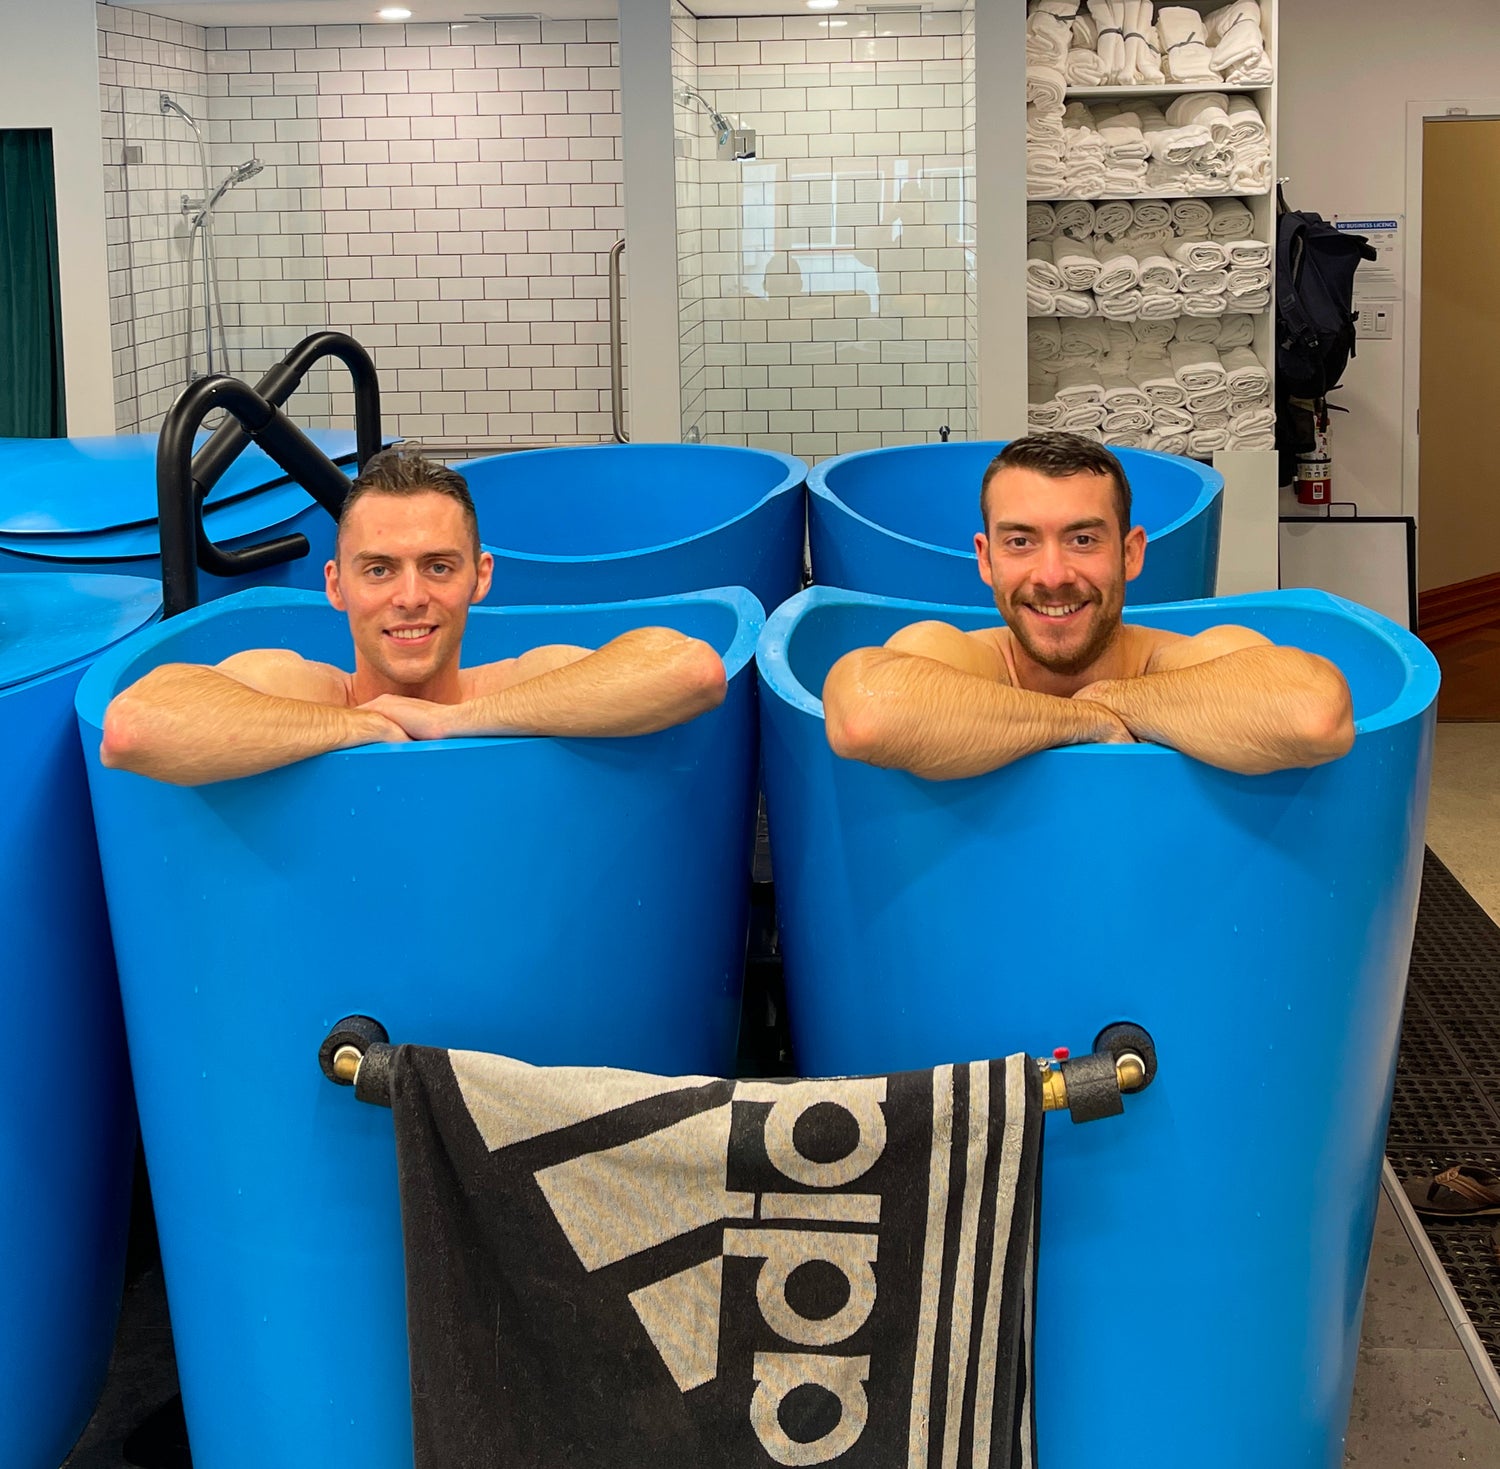 Member booking image - Two guys in separate tubs